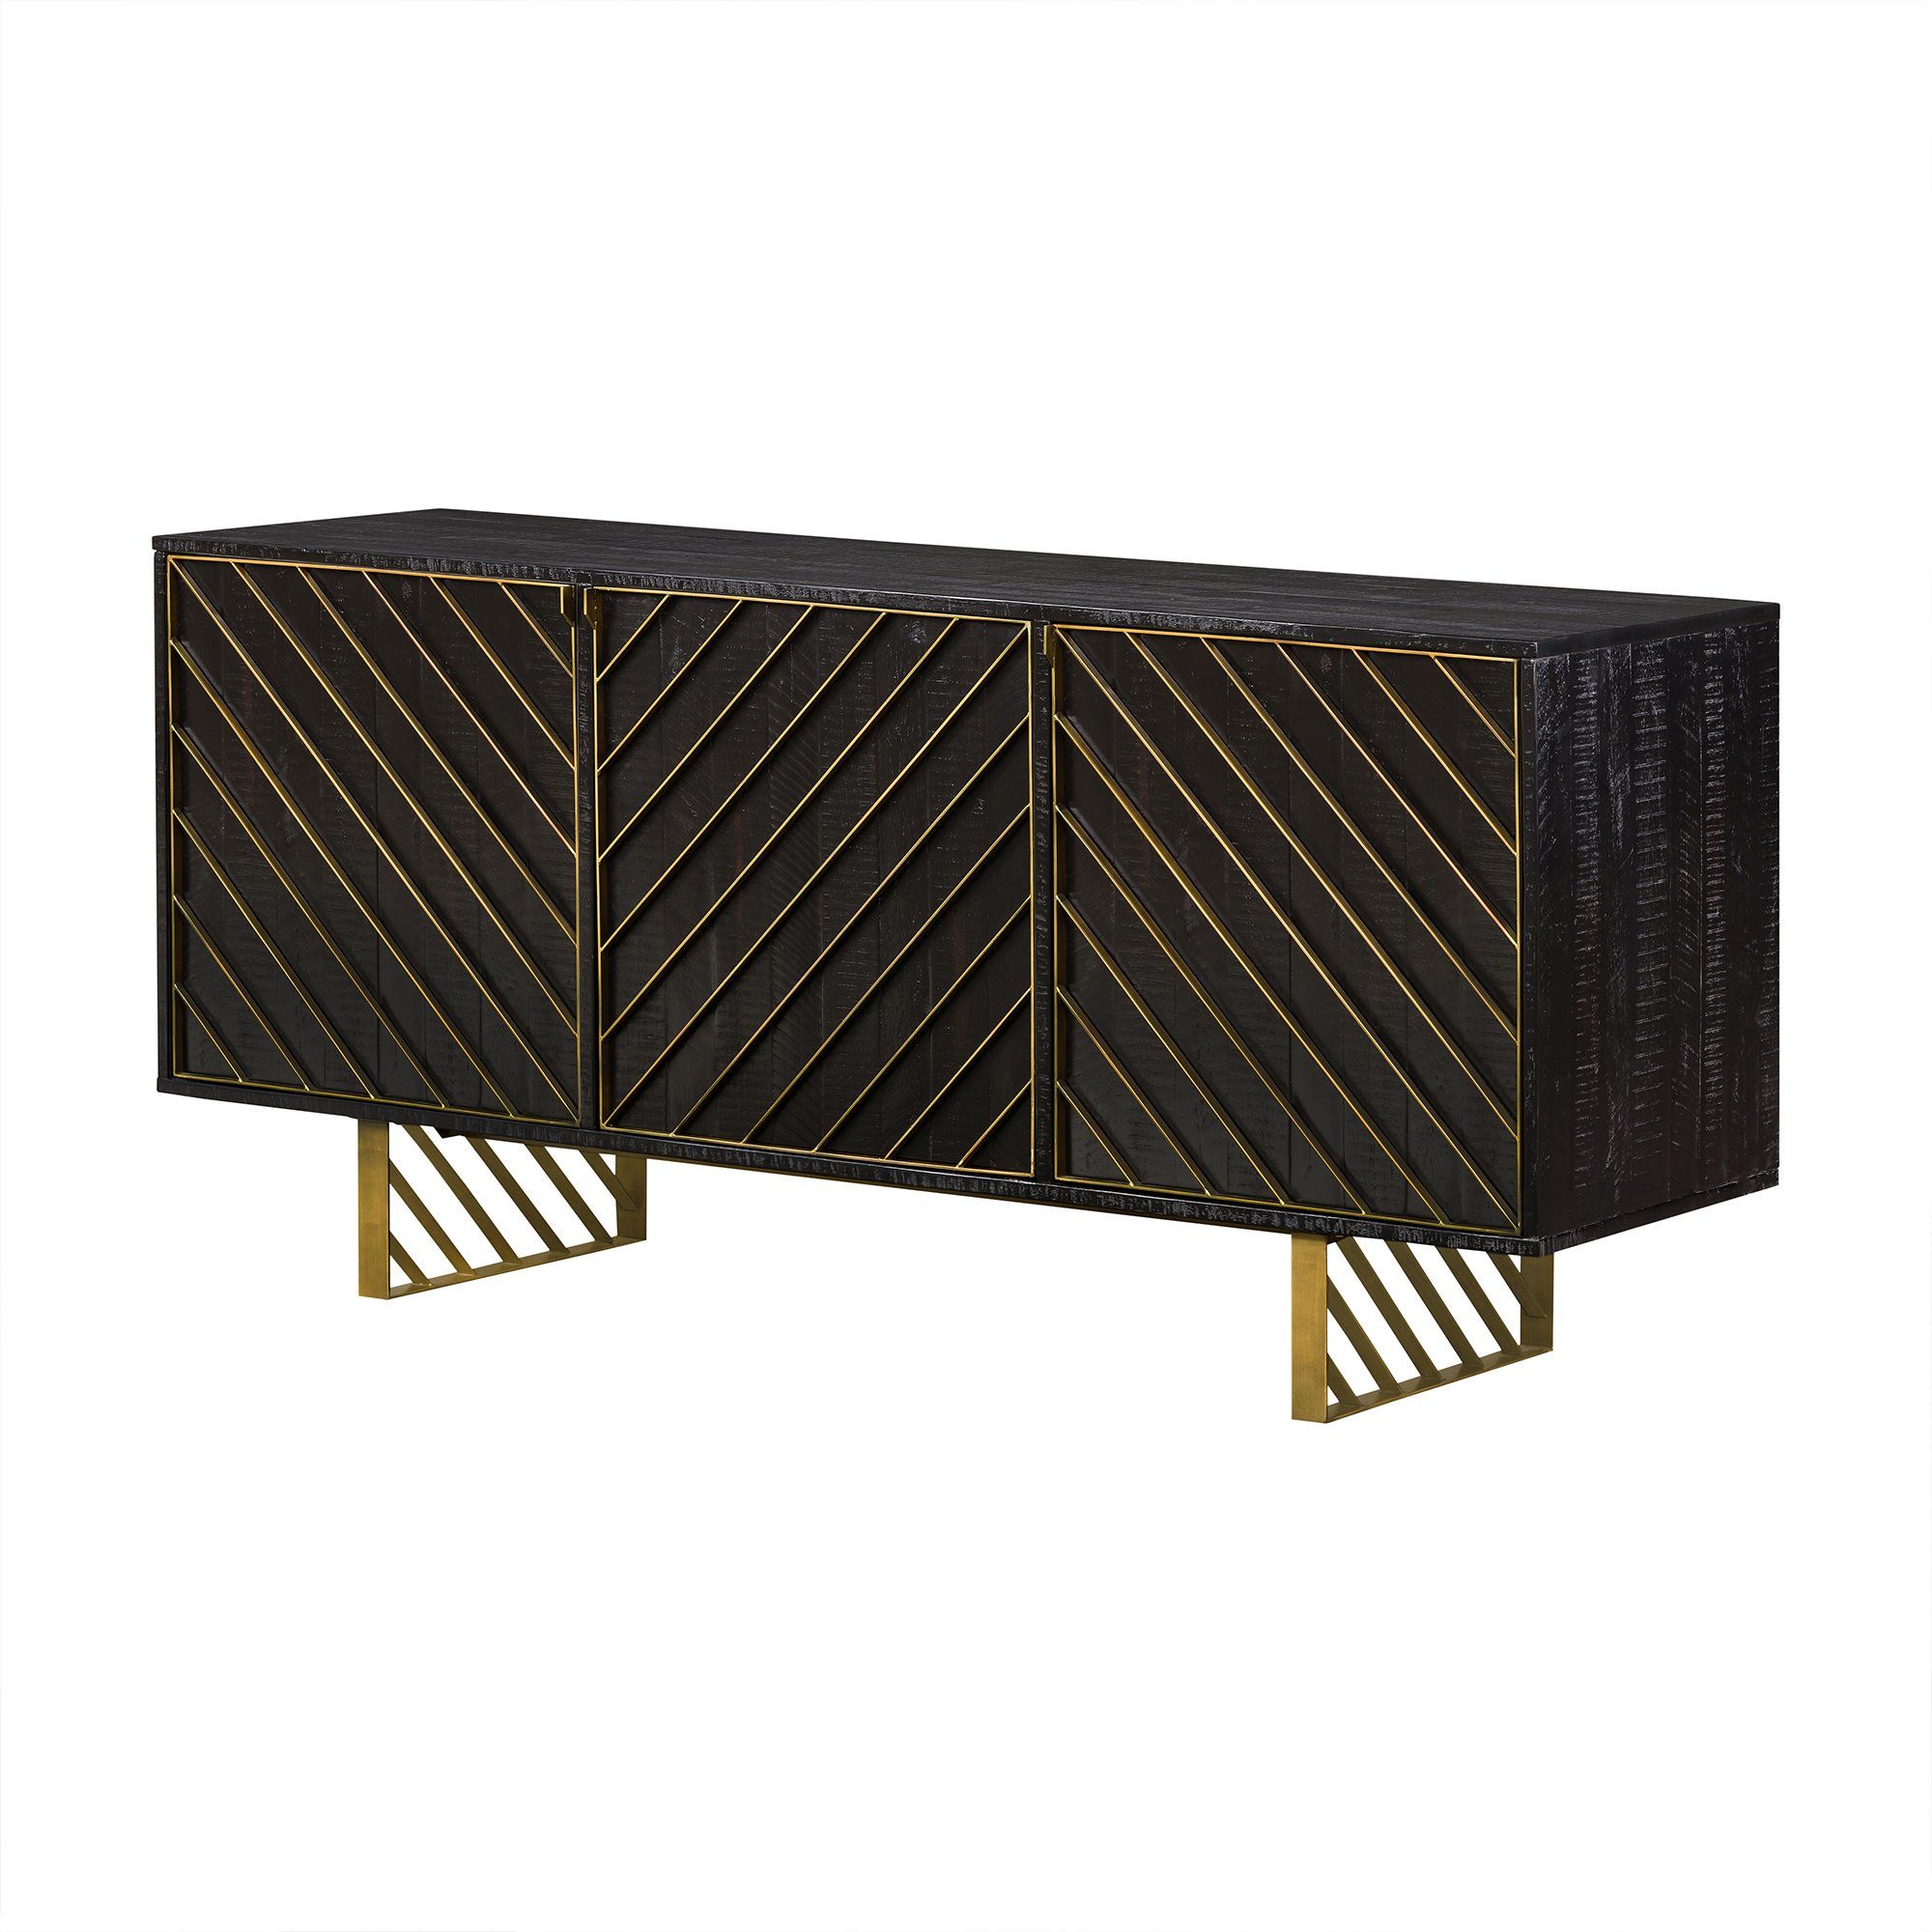 Wooden Sideboard with Six Shelves and Metal Accents, Gold and Black | Walmart (US)